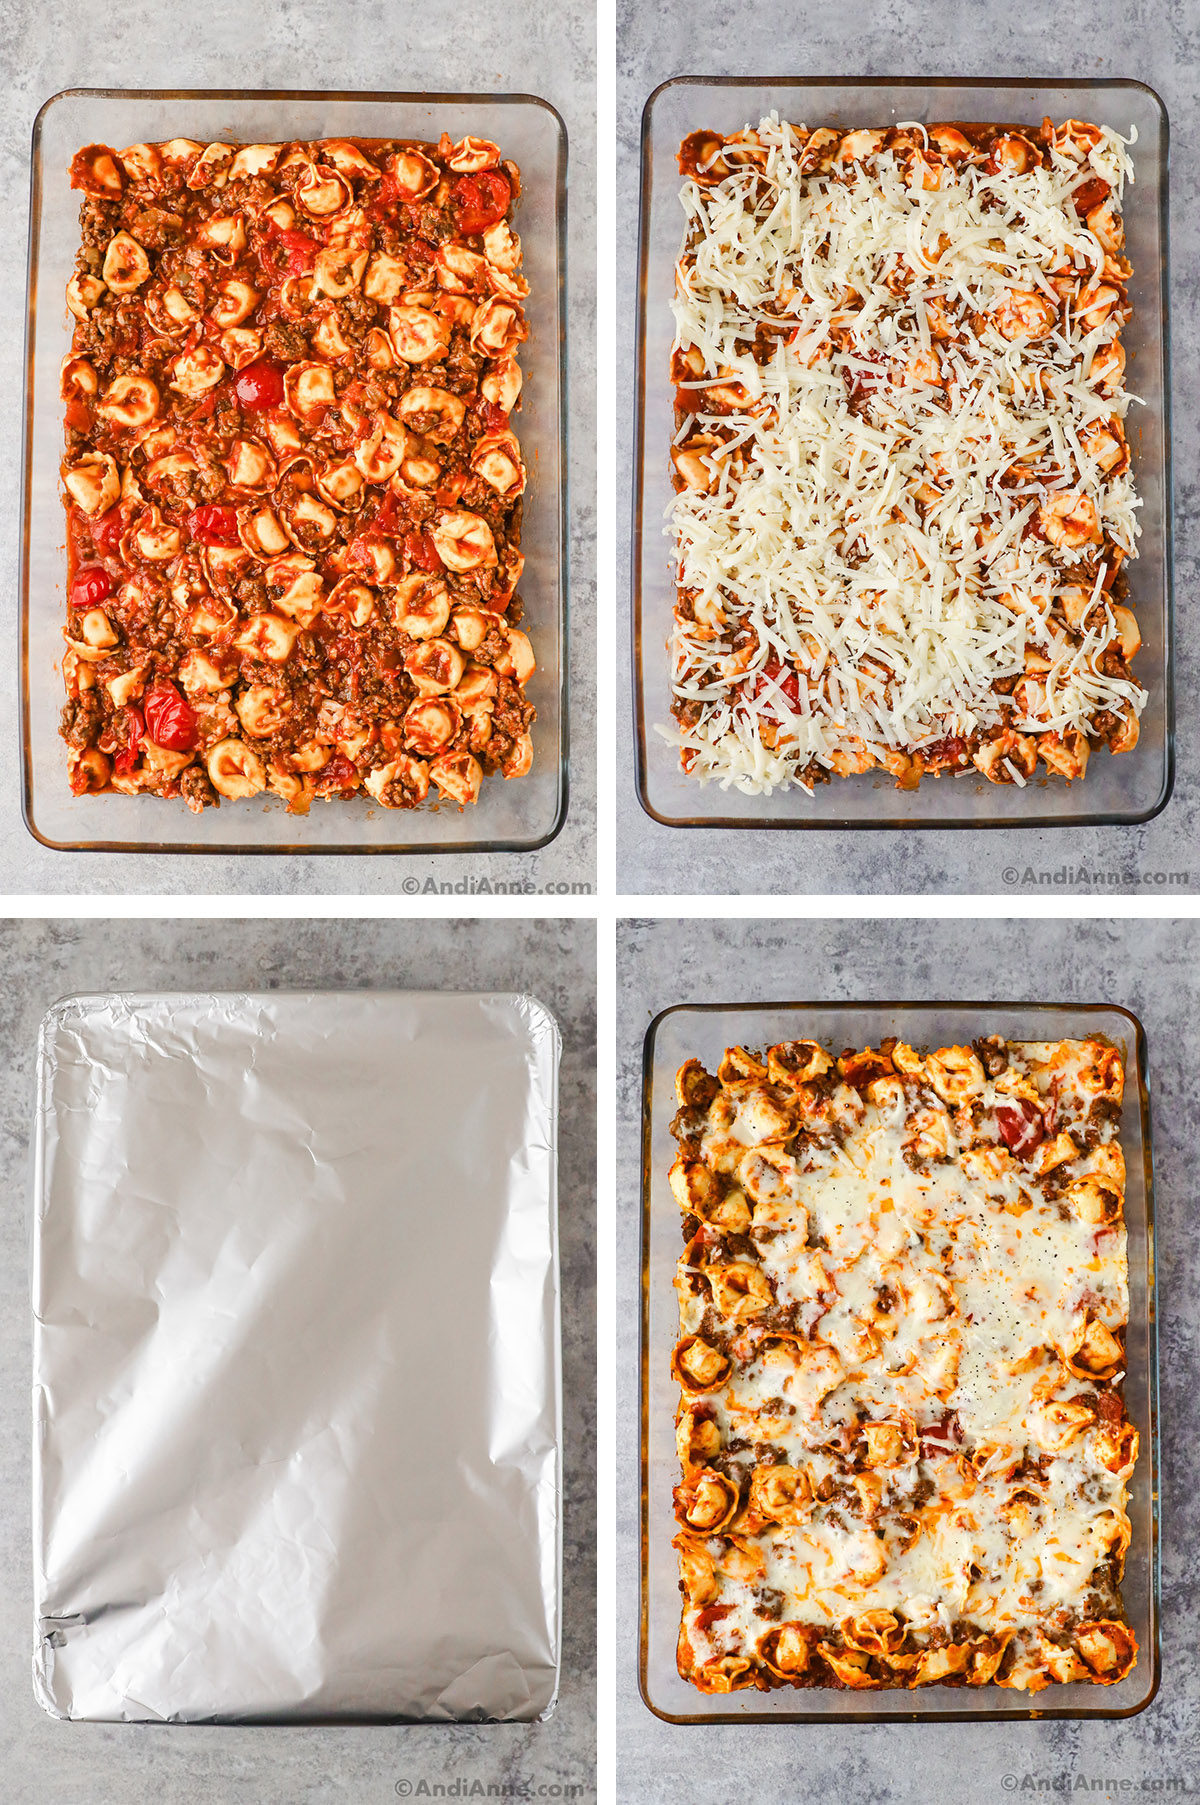 Four images of a glass casserole dish with ground beef tortellini mixture in various stages, including covered with cheese, covered with foil and then fully baked.